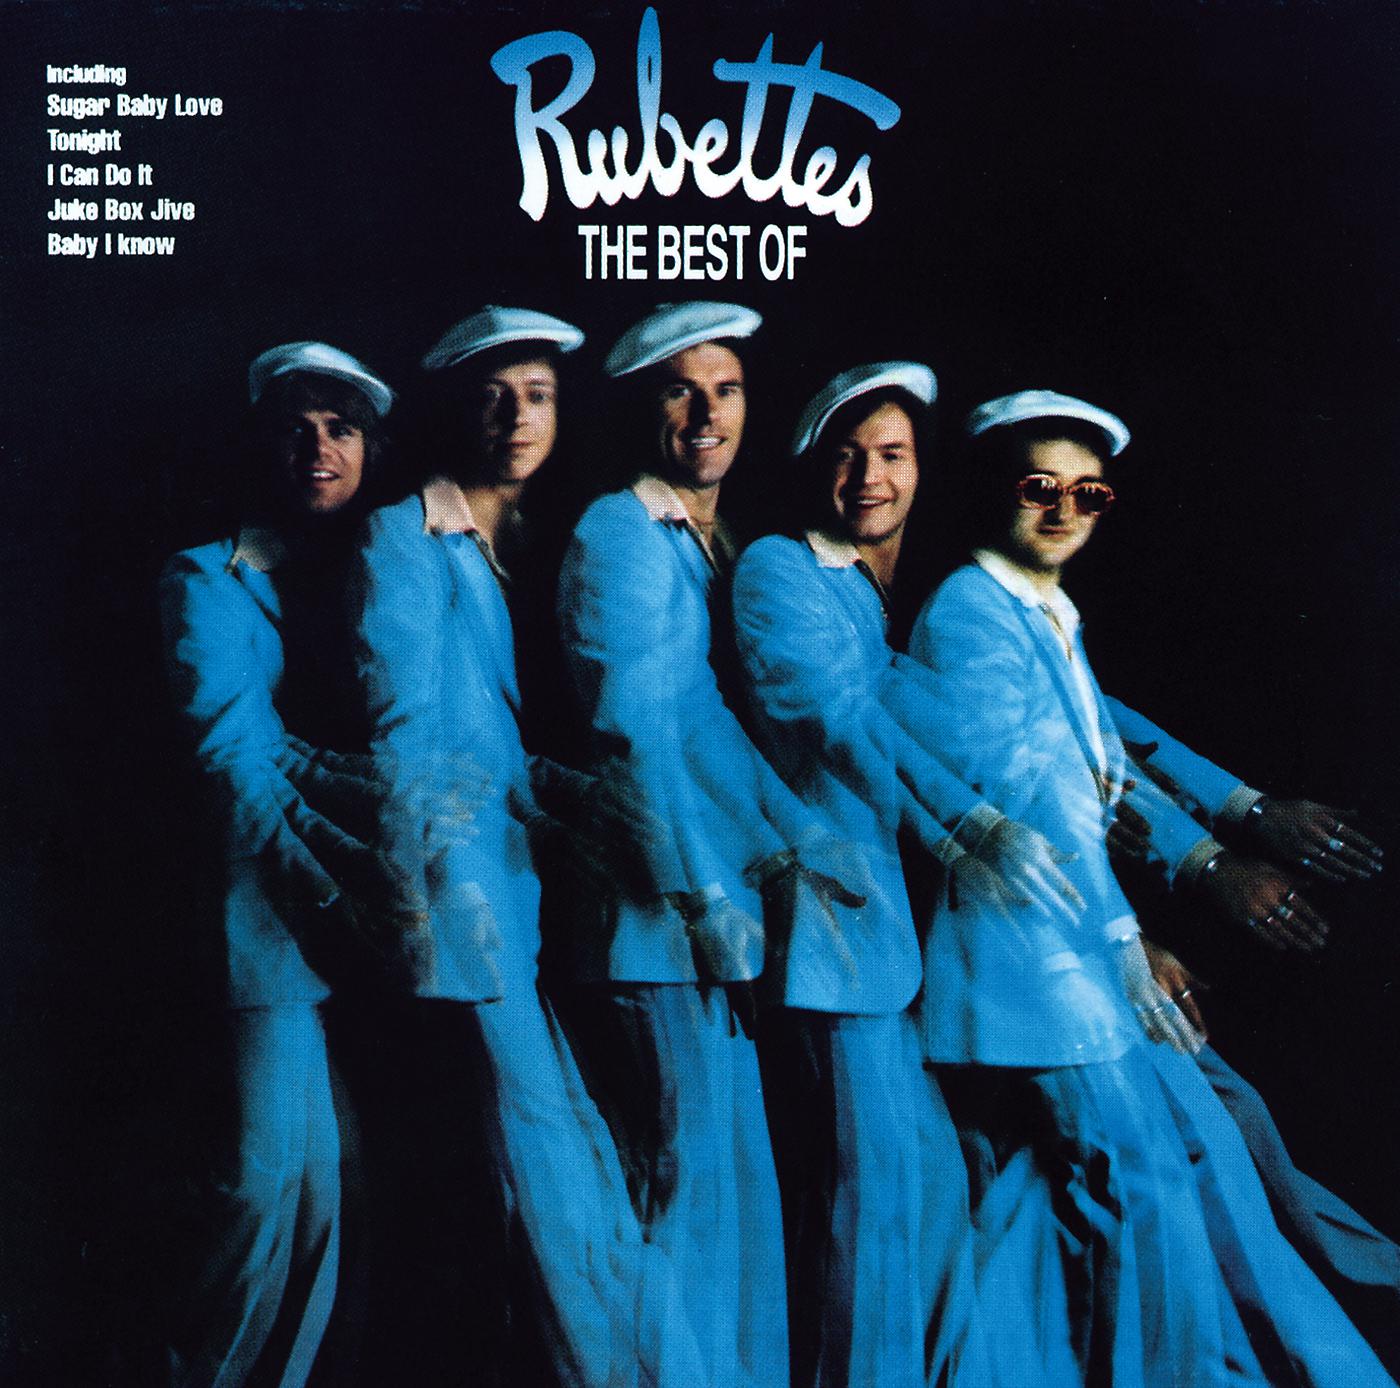 The Rubettes LP. The Rubettes - 1975 - Rubettes. The Rubettes 1975 we can do it. The best of the Rubettes.